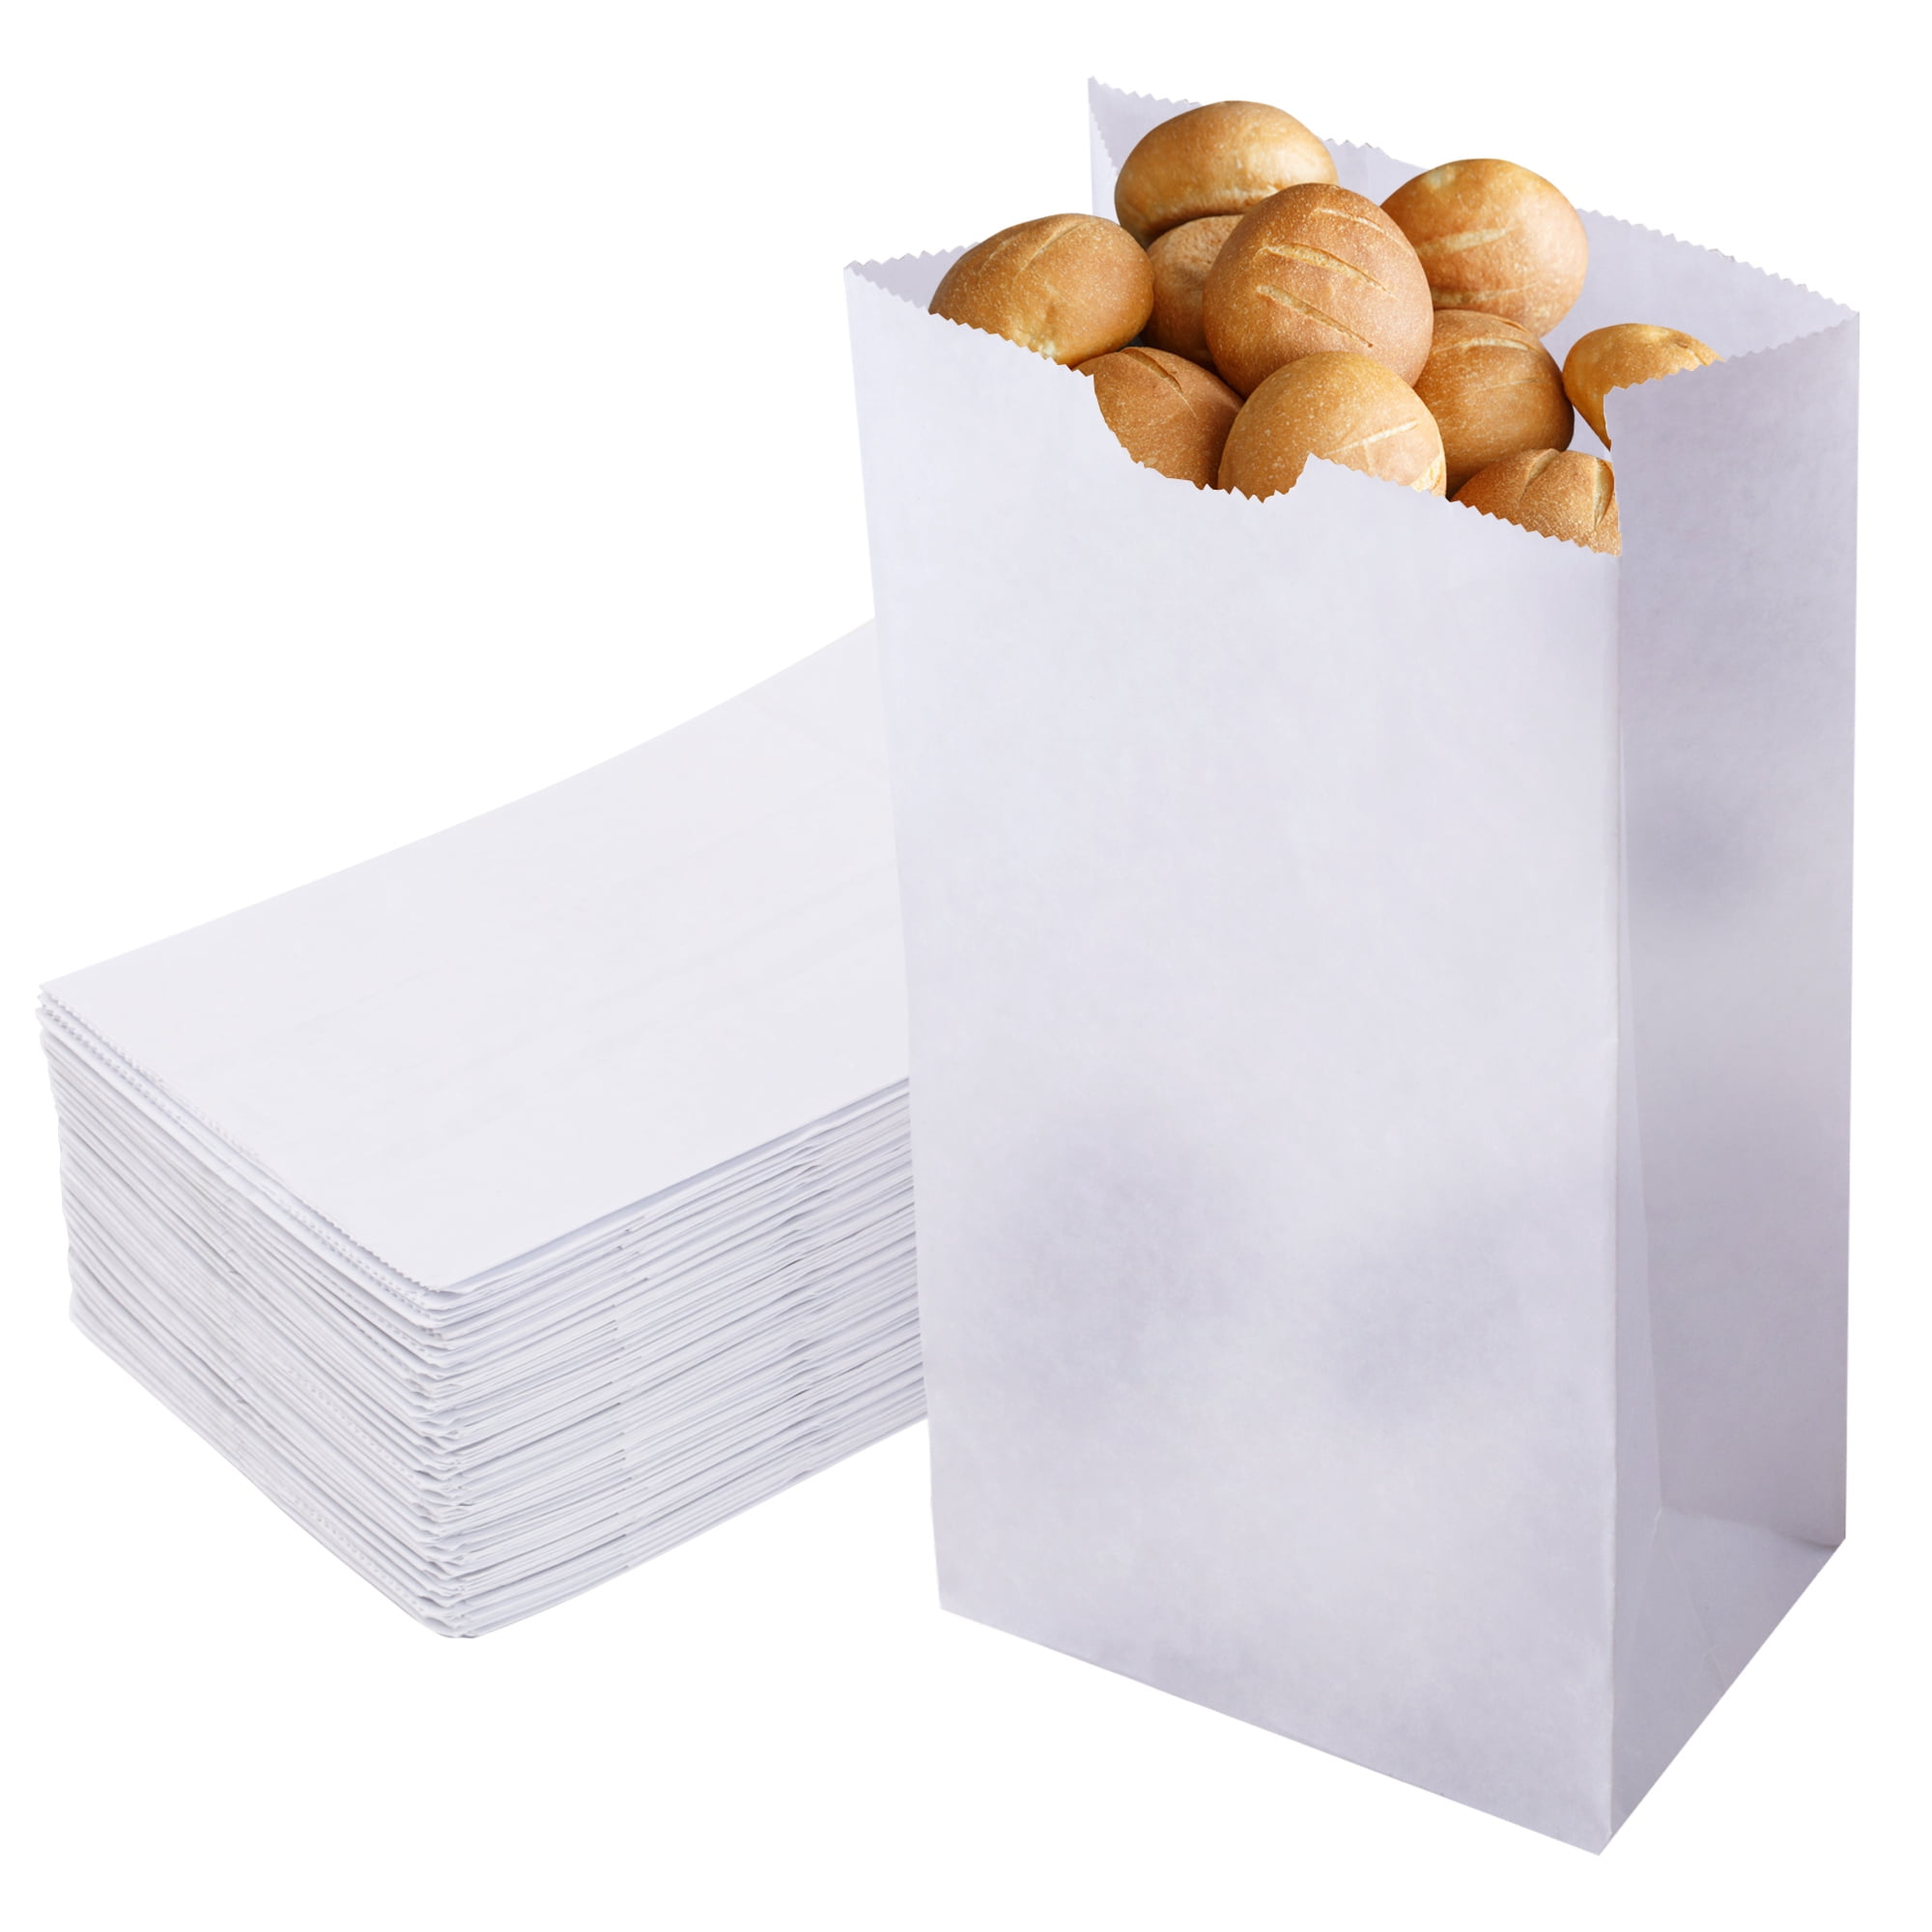 PAPER BAGS Market Stall Lunch Kids Sweets Sandwich Paper Bags Bag 